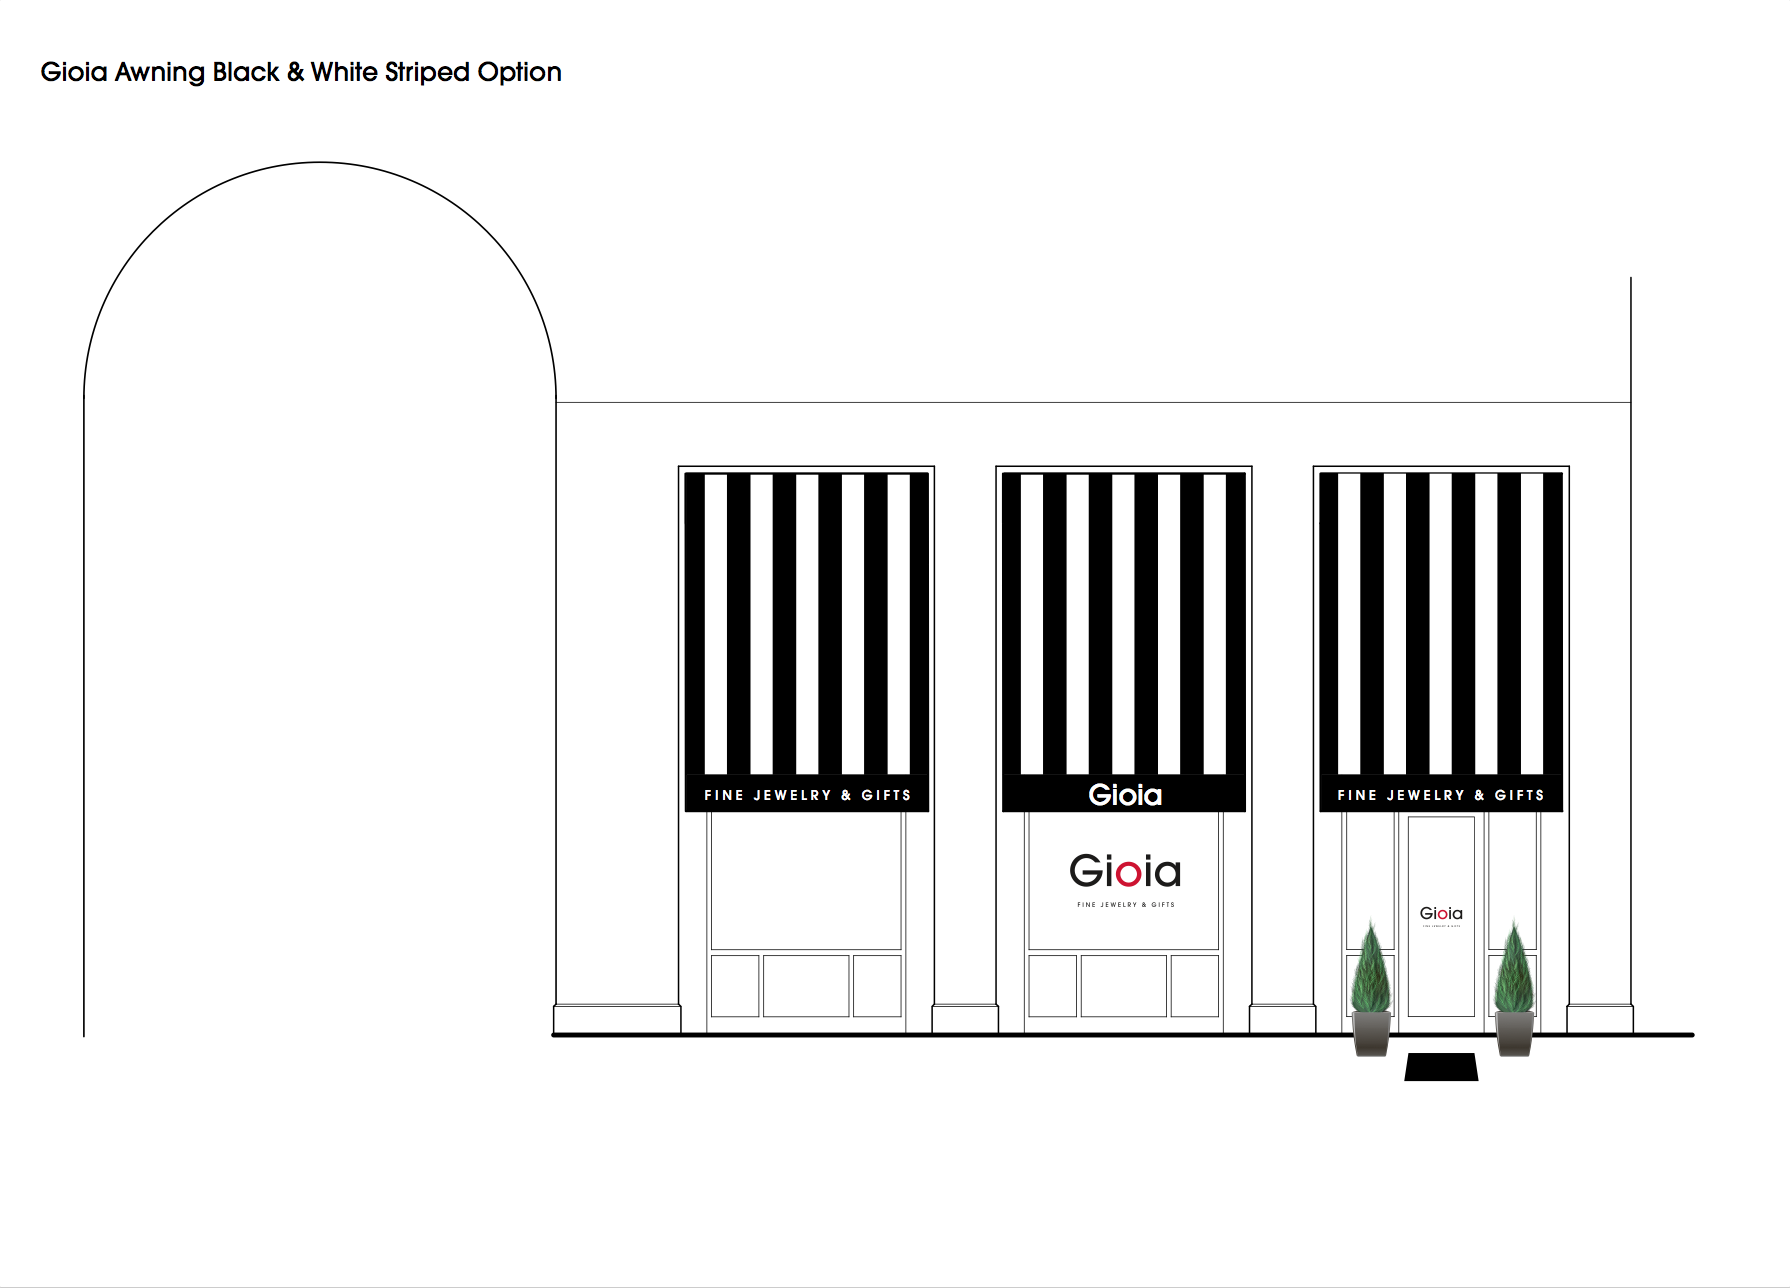 Rendering of Gioia's awnings designed by The Idea Boutique